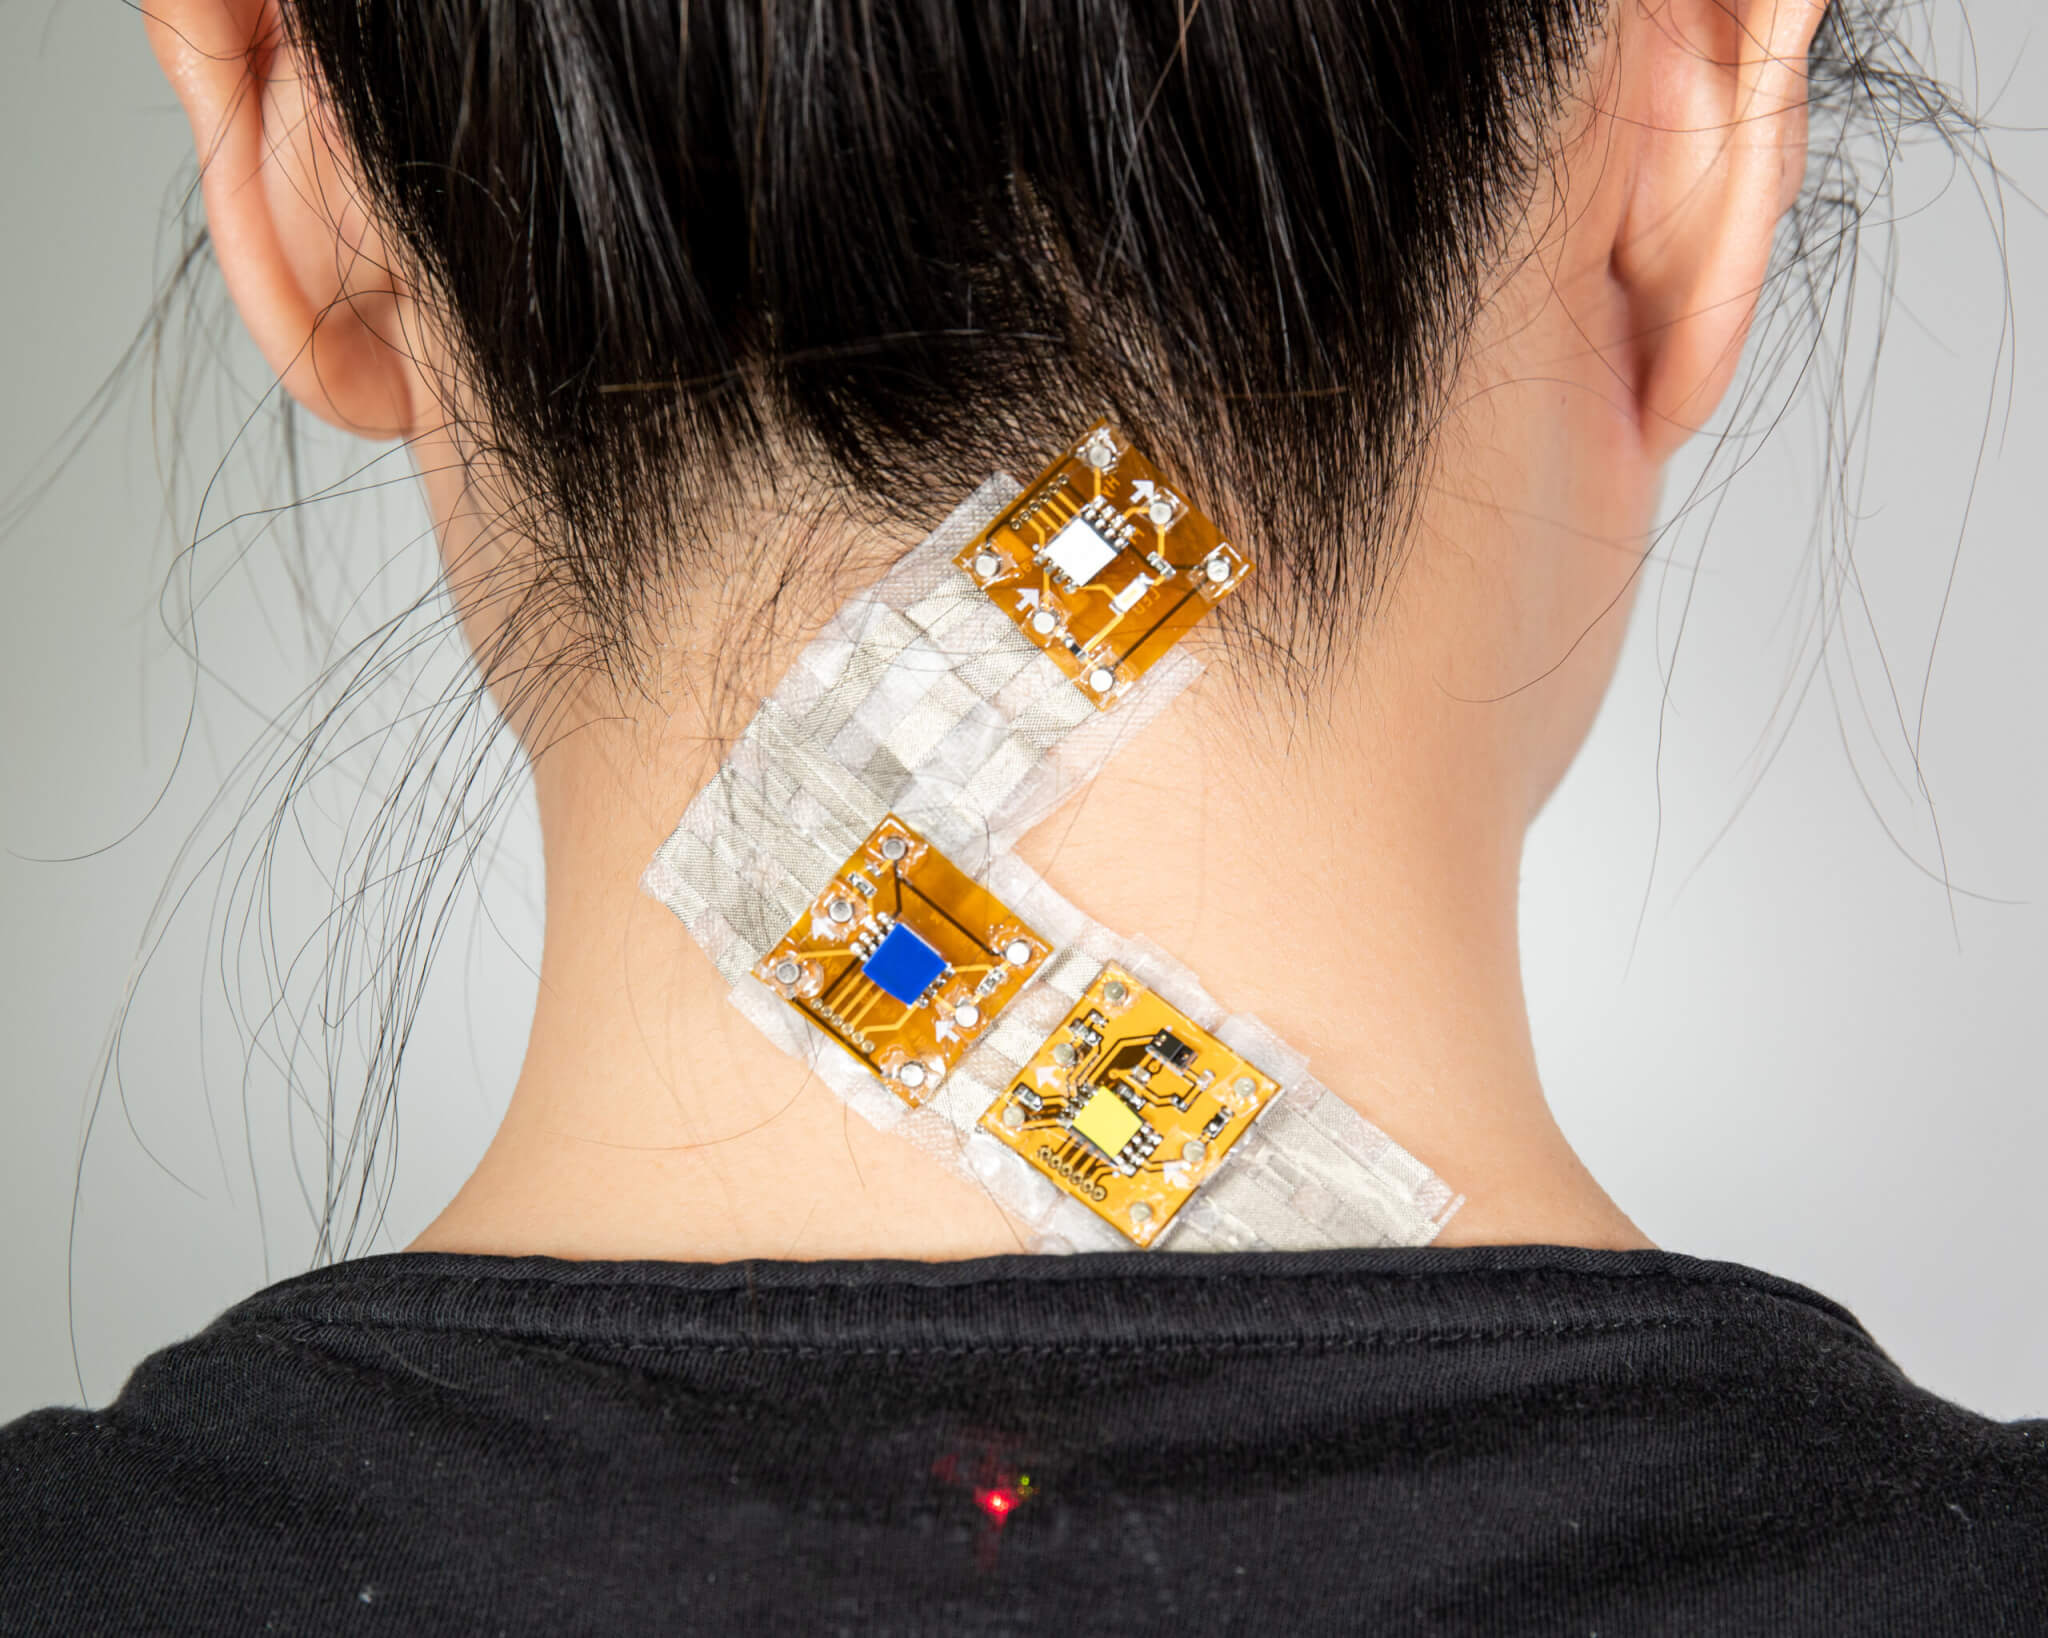 The Cornell Hybrid Body Lab has developed SkinKit, the first design toolkit for interfaces on the skin (wearable computers).